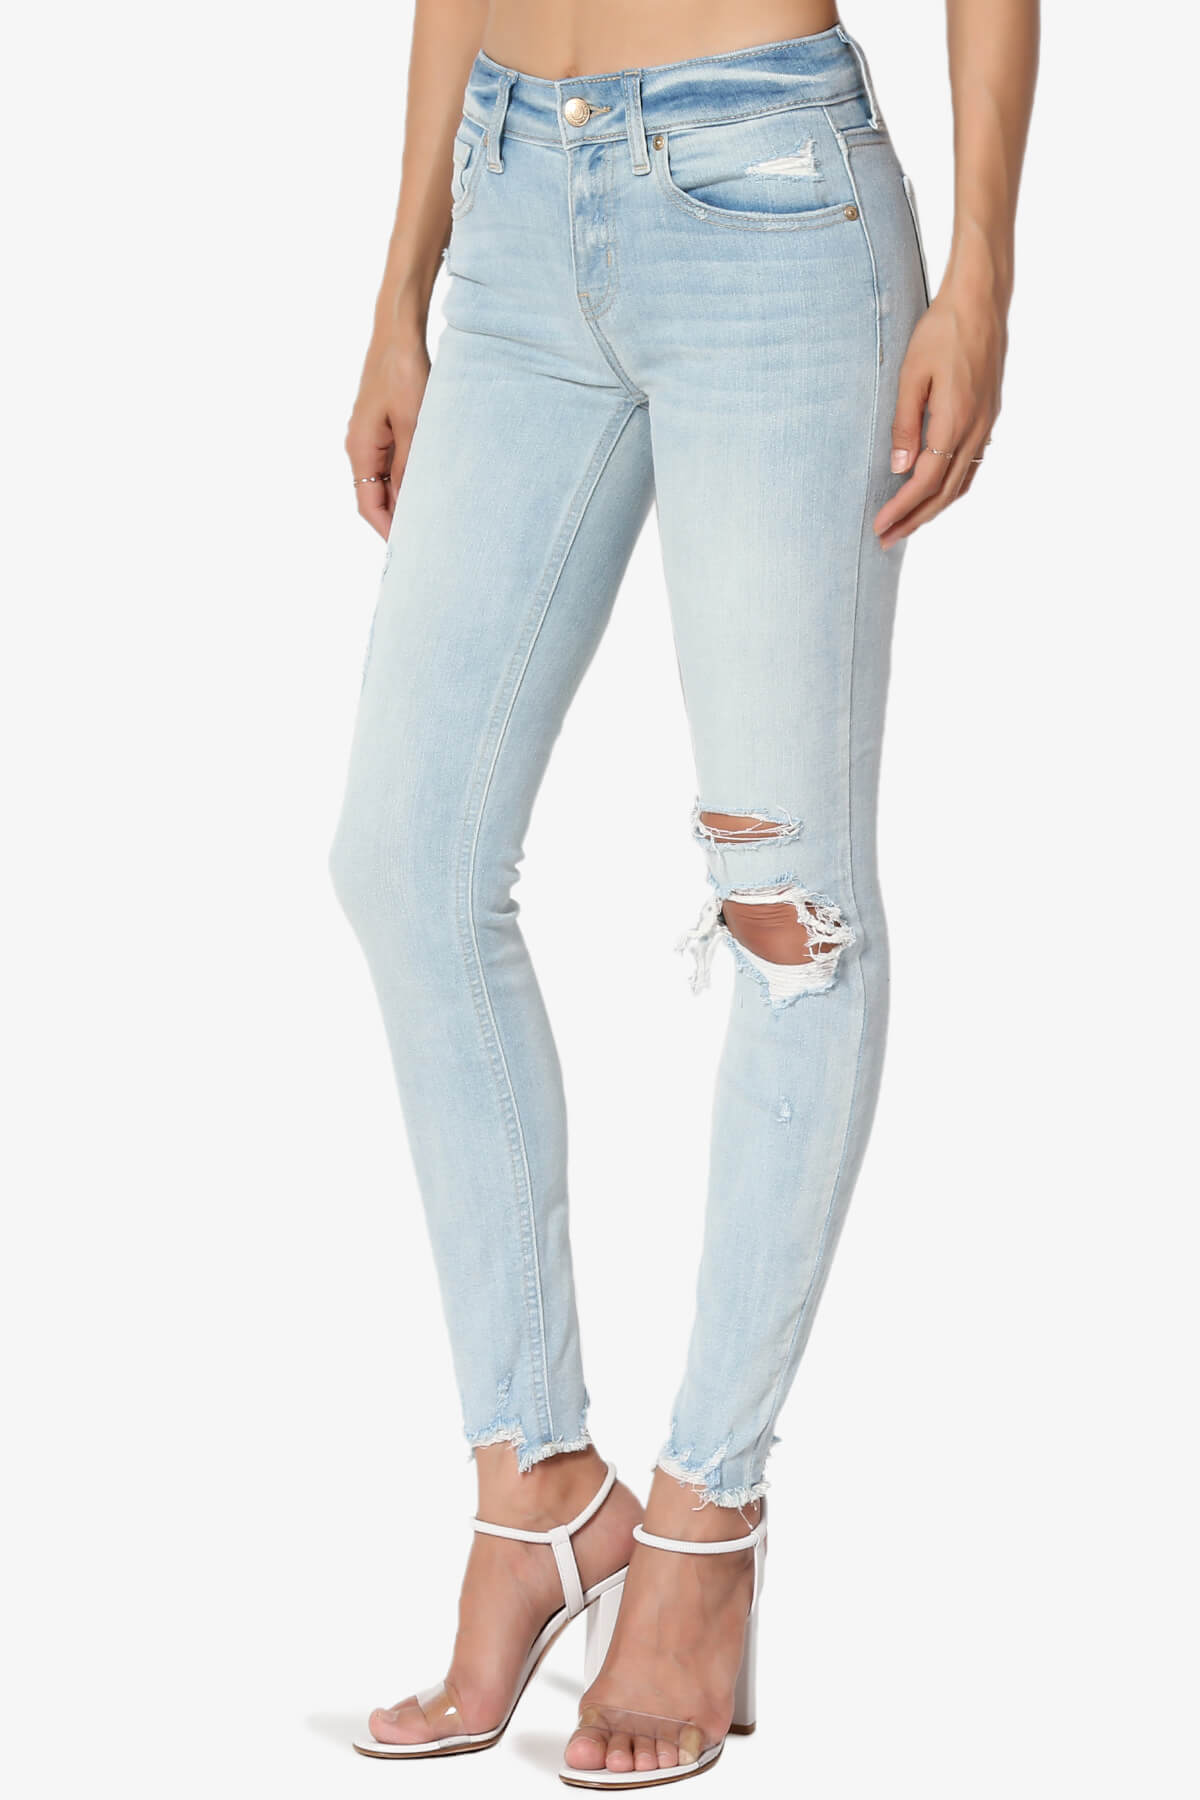 Josie Mid Rise Skinny Jeans in Cold Blooded LT LIGHT_3